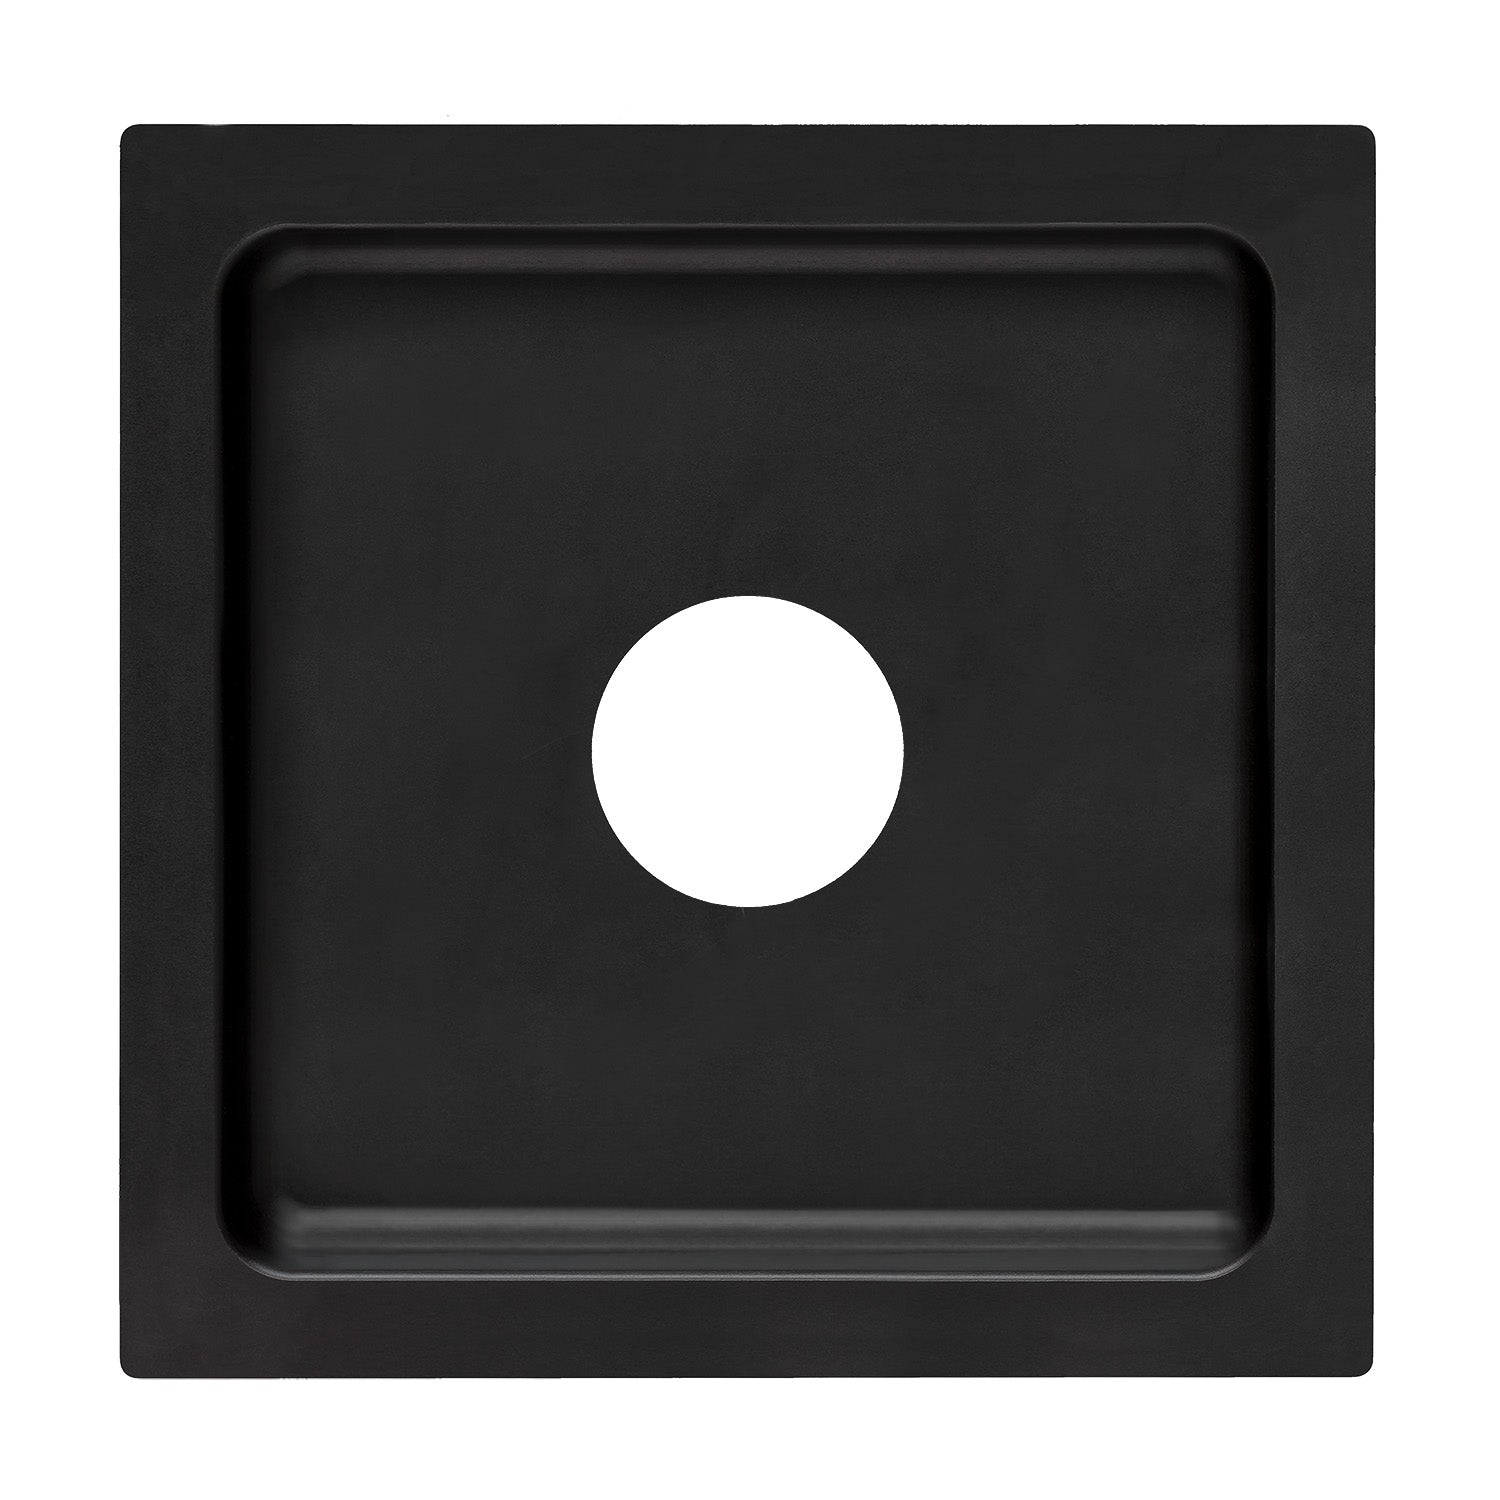 Lens Board 141x141 Recessed 18 mm, Size 0